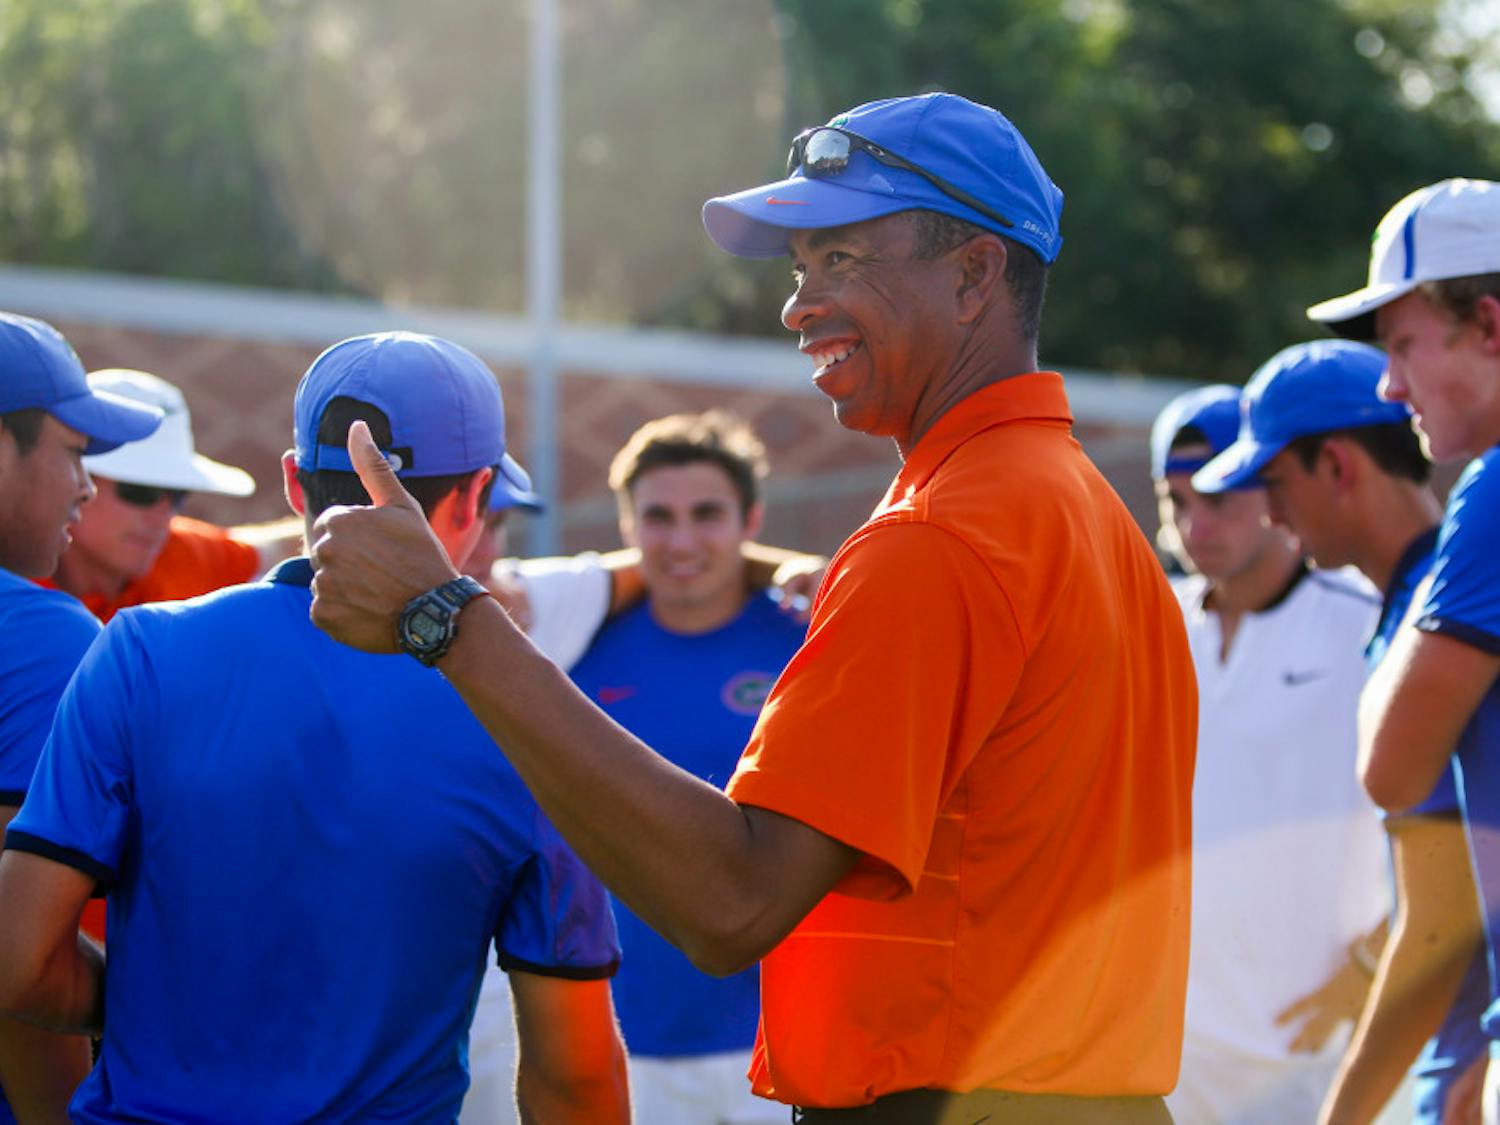 UF men's tennis coach Bryan Shelton joins his team after its Senior Day match with Alabama on April 13.  The Gators went 19-10 on the season and qualified for the NCAA Tournament.